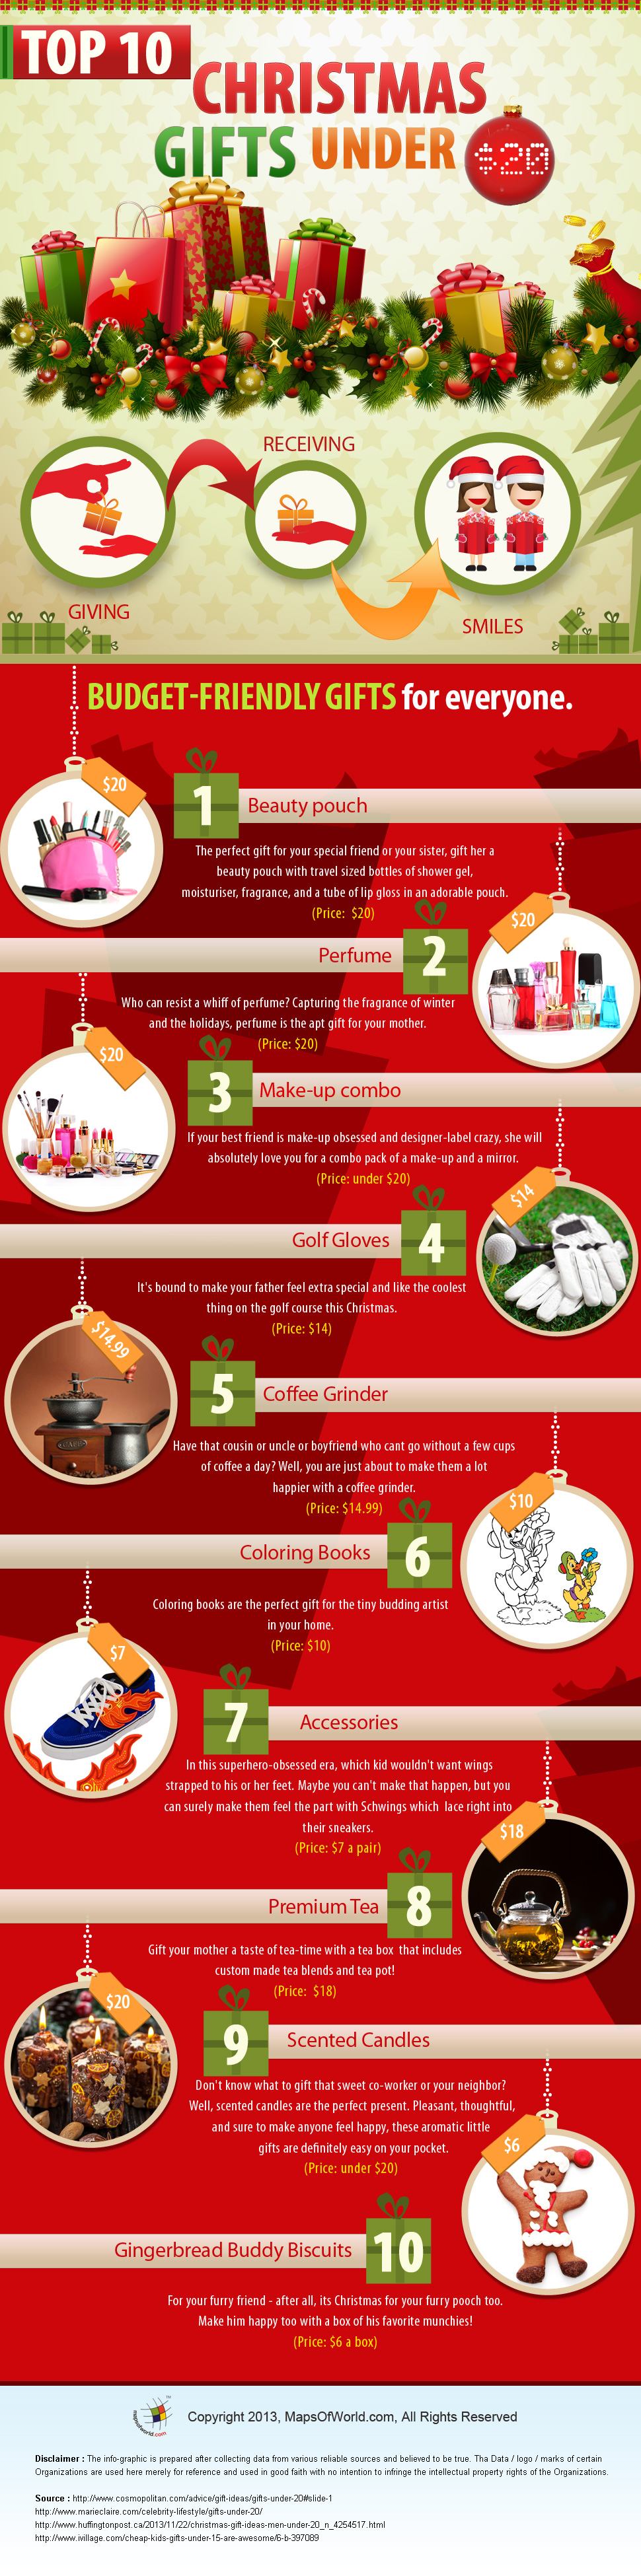 Mailing Christmas Gifts? 2015 Christmas Mailing Deadlines (INFOGRAPHIC